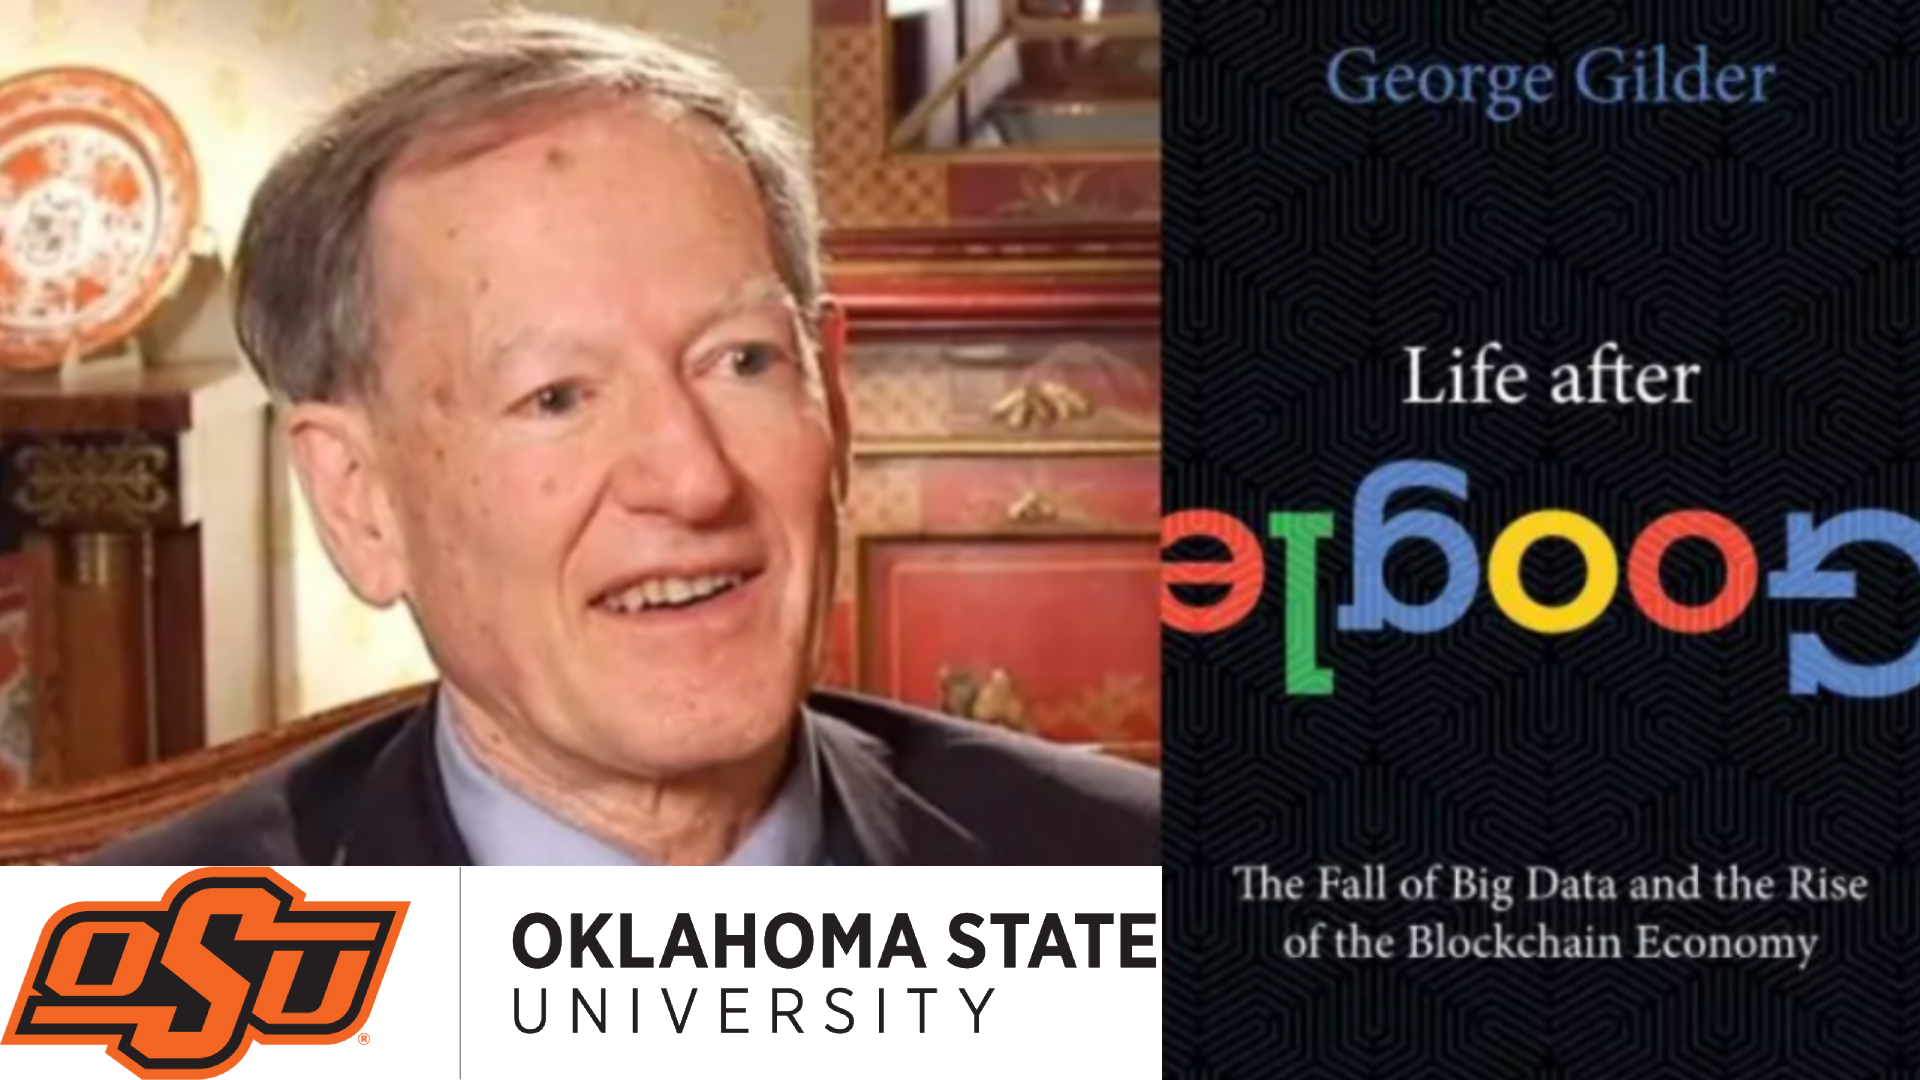 @threespeak/life-after-google-event-with-george-gilder-at-oklahoma-state-university